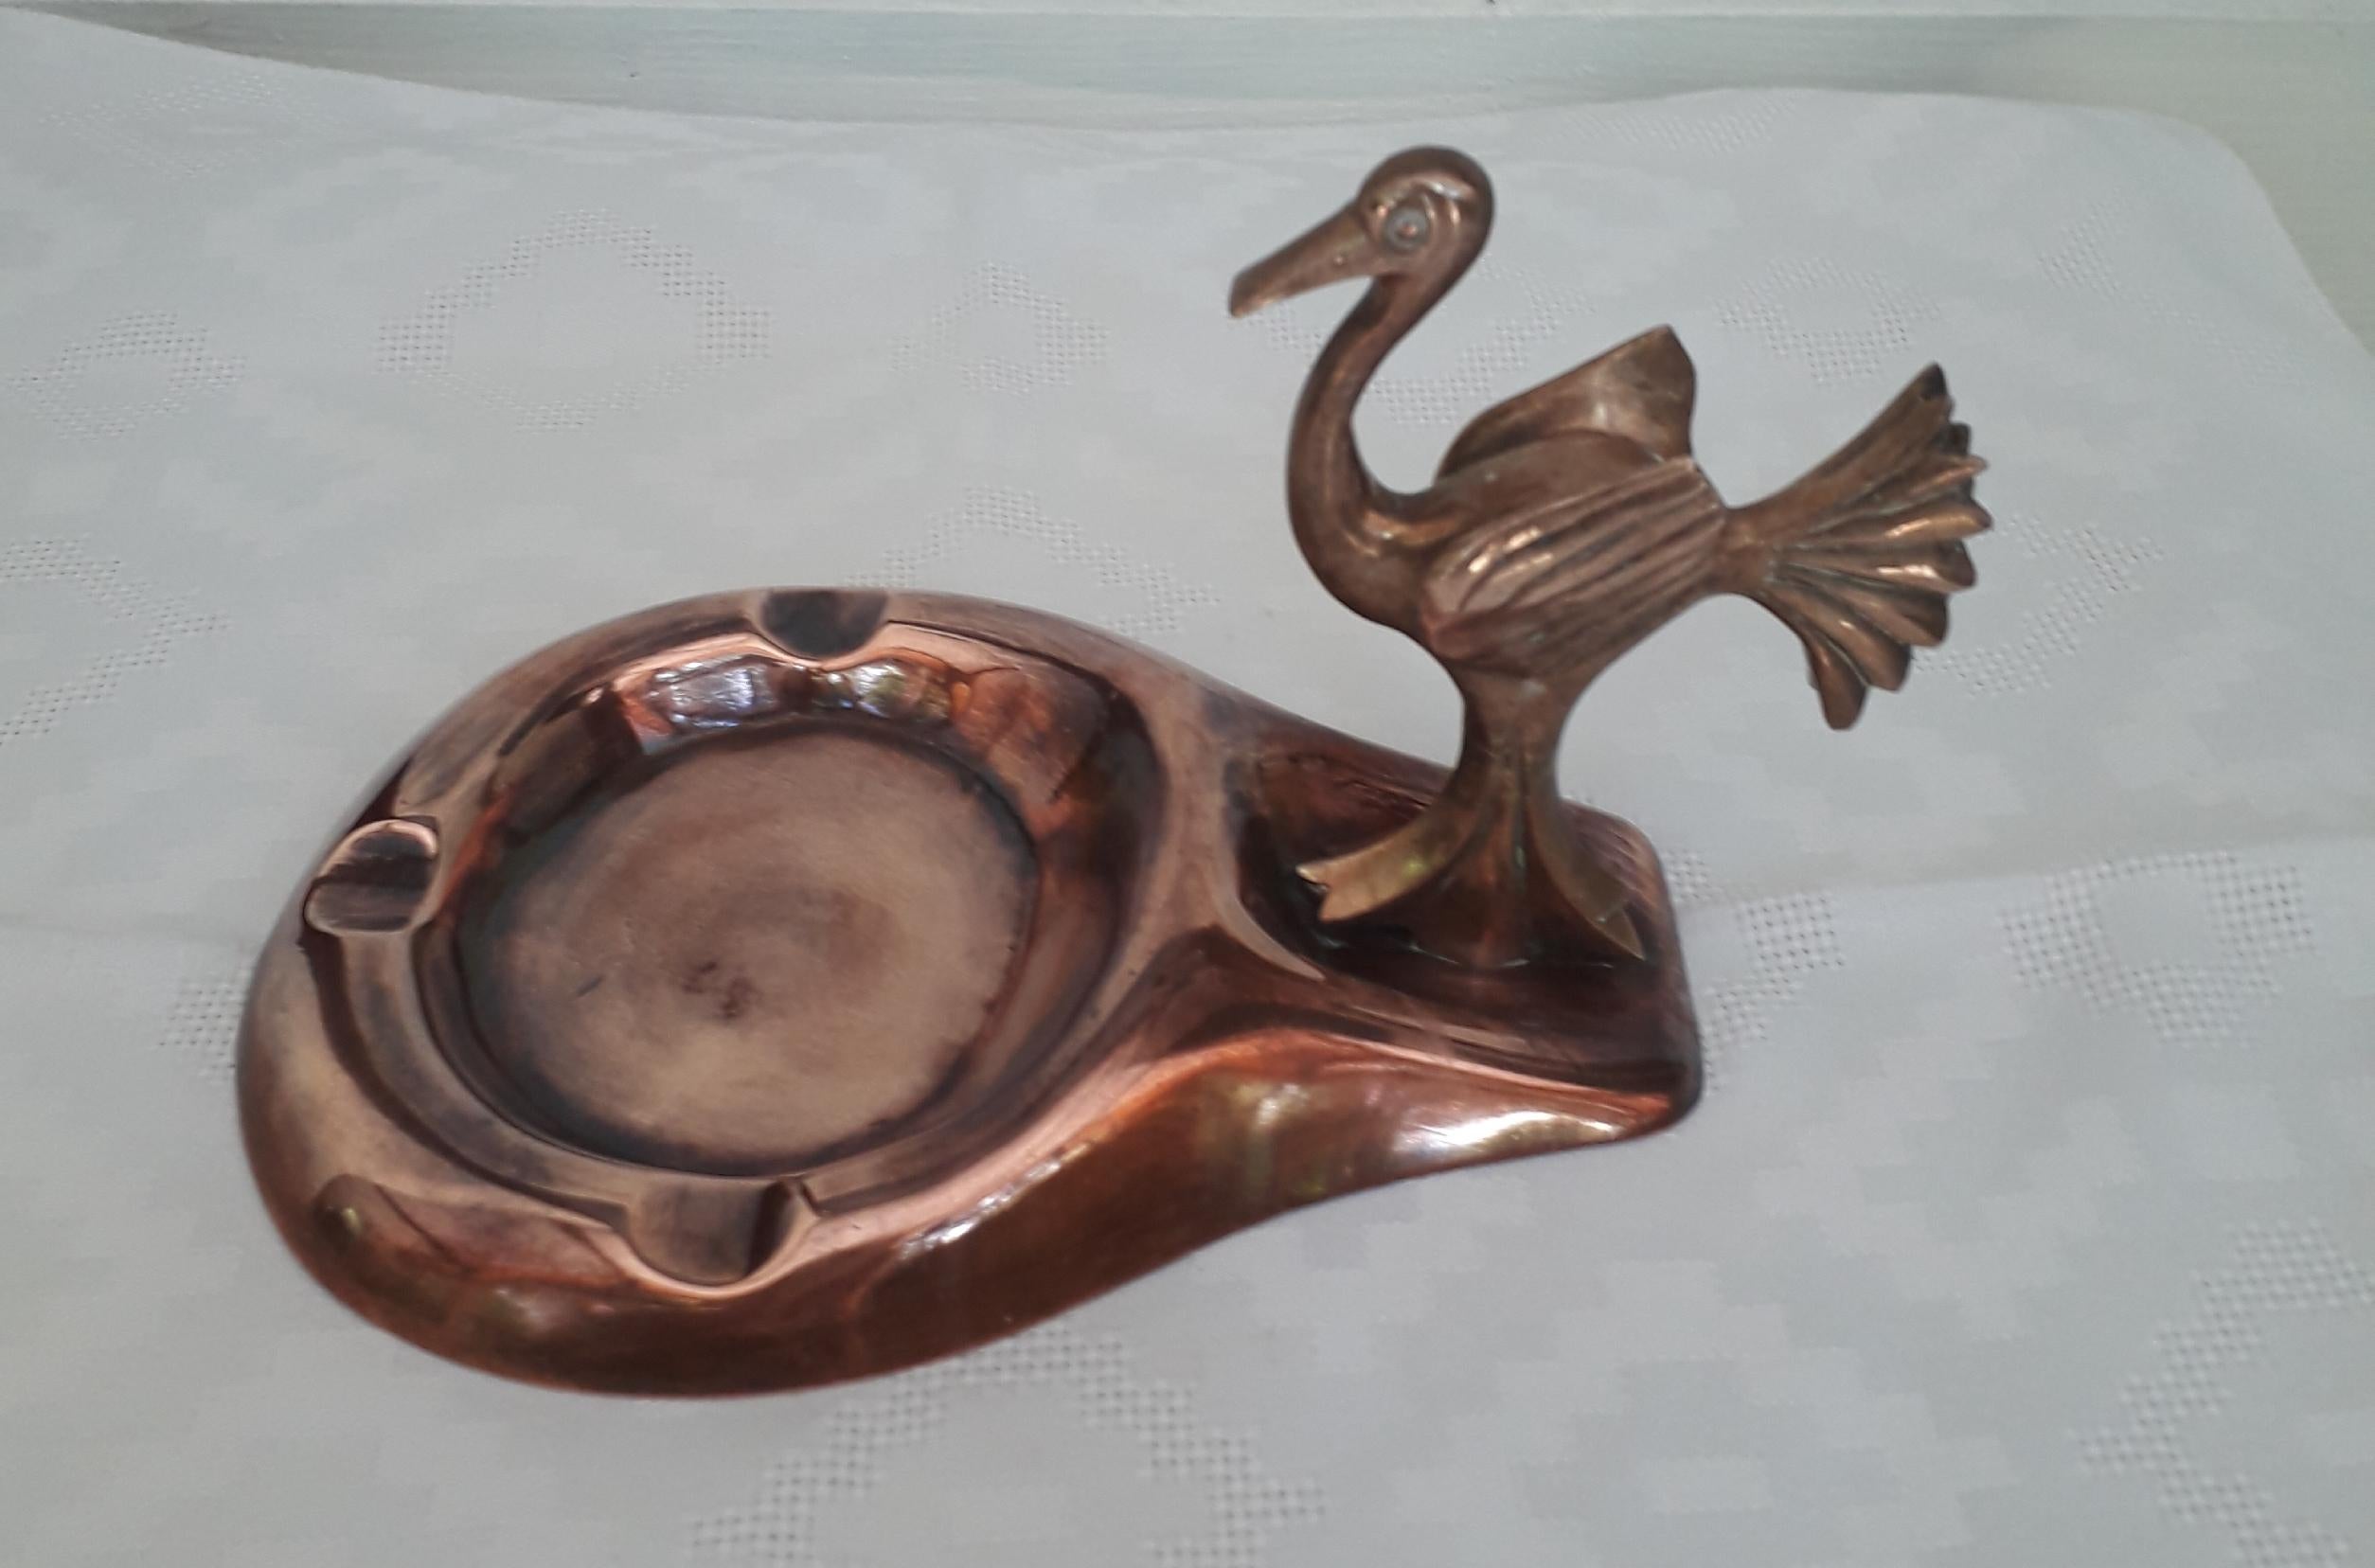 20th Century Ashtray Brass, with Heron Figurine, Signed, Mid-Century Modern, France, 1951